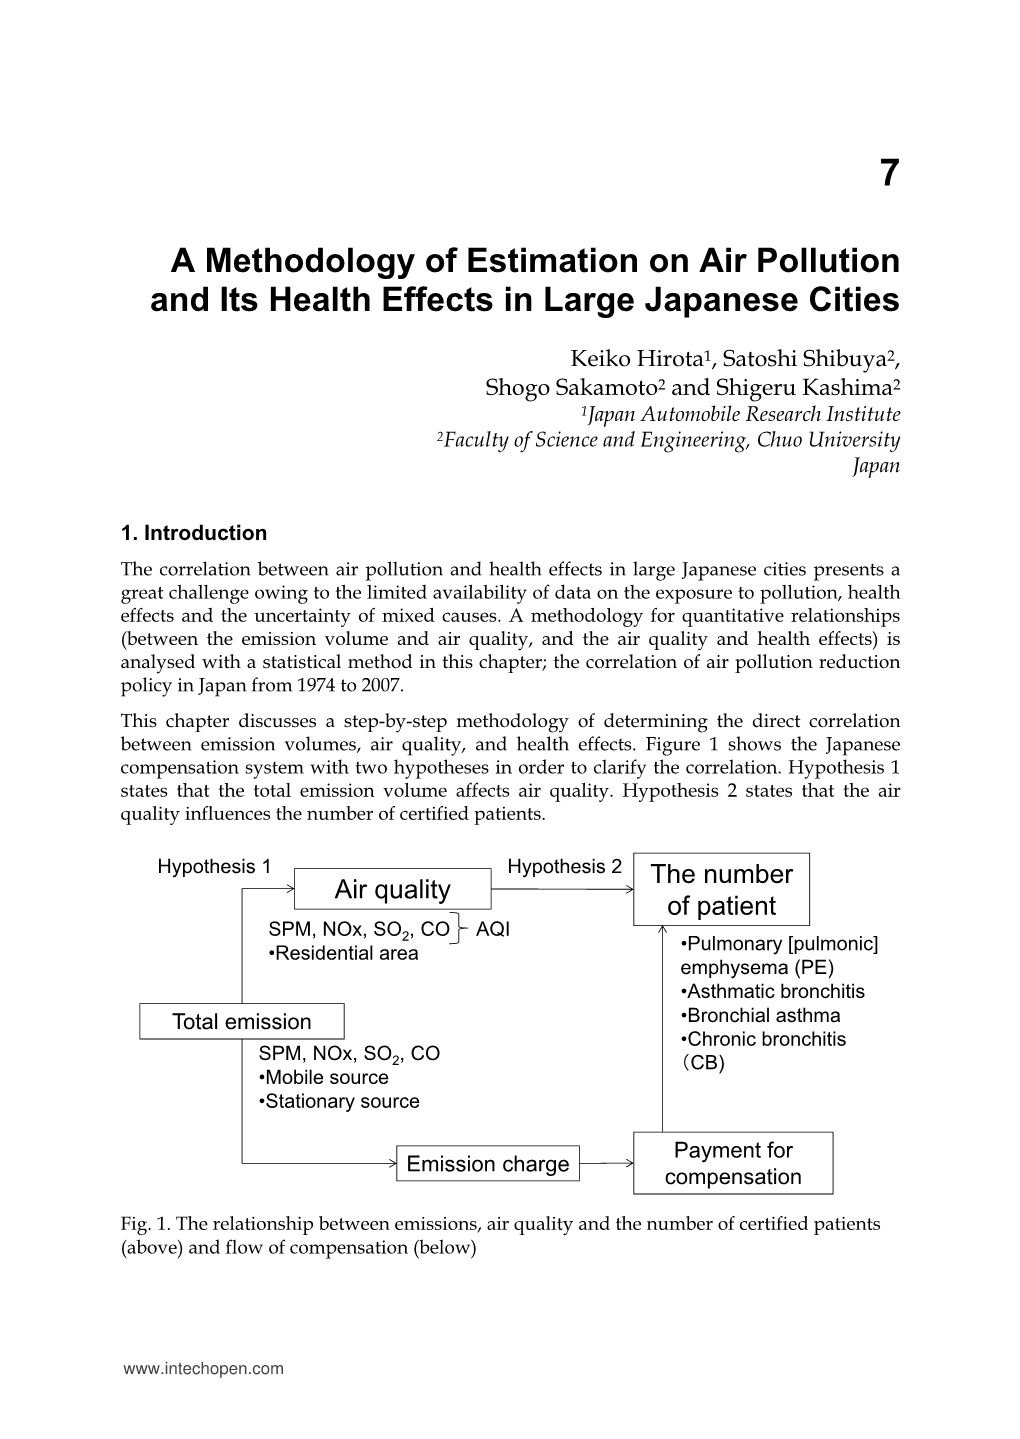 A Methodology of Estimation on Air Pollution and Its Health Effects in Large Japanese Cities